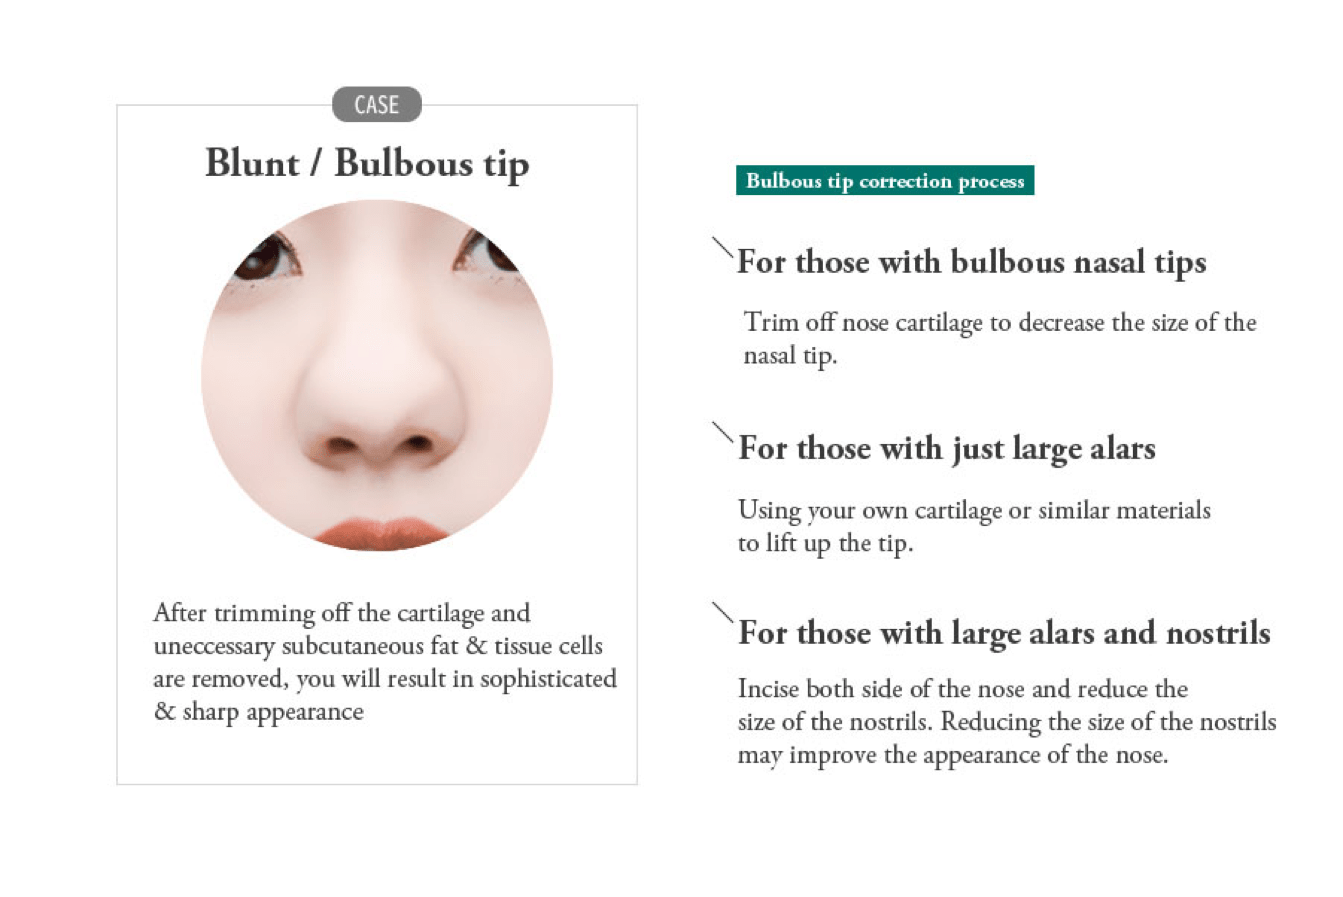 Blunt or Bulbous Tip Correction